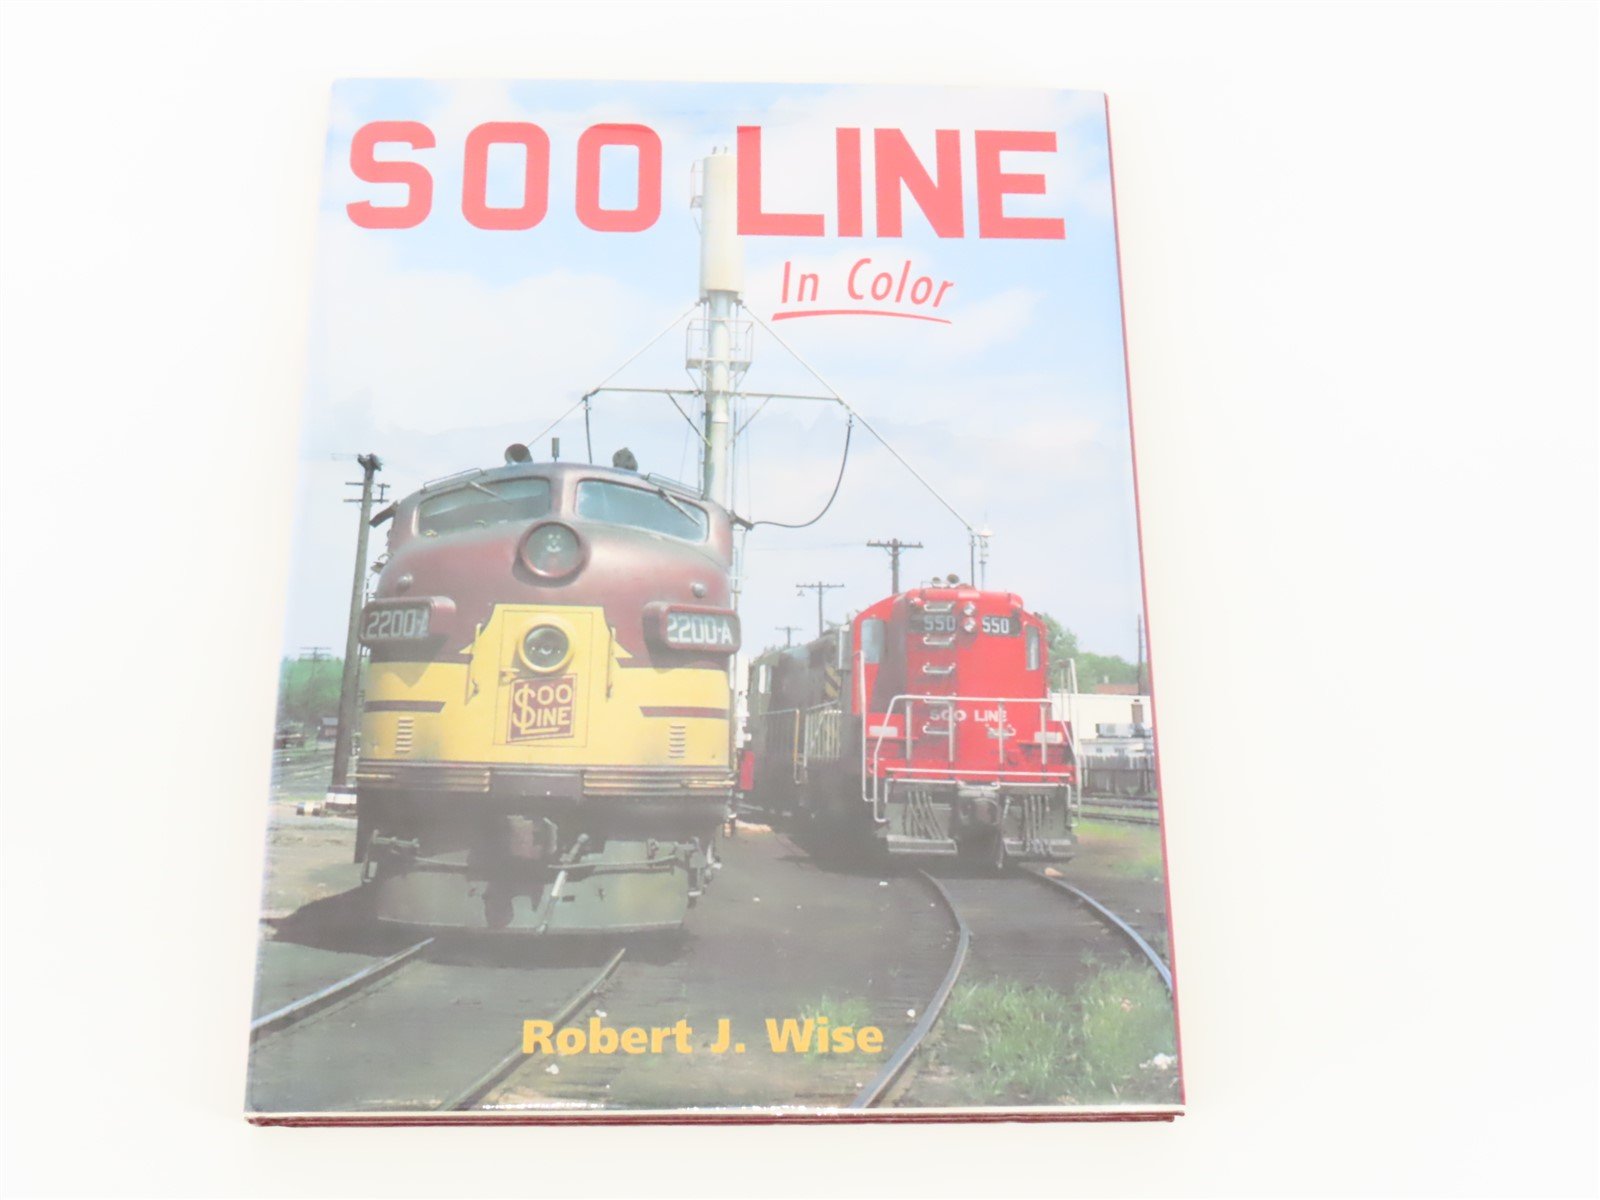 Morning Sun: SOO Line In Color by Robert J. Wise ©1997 HC Book